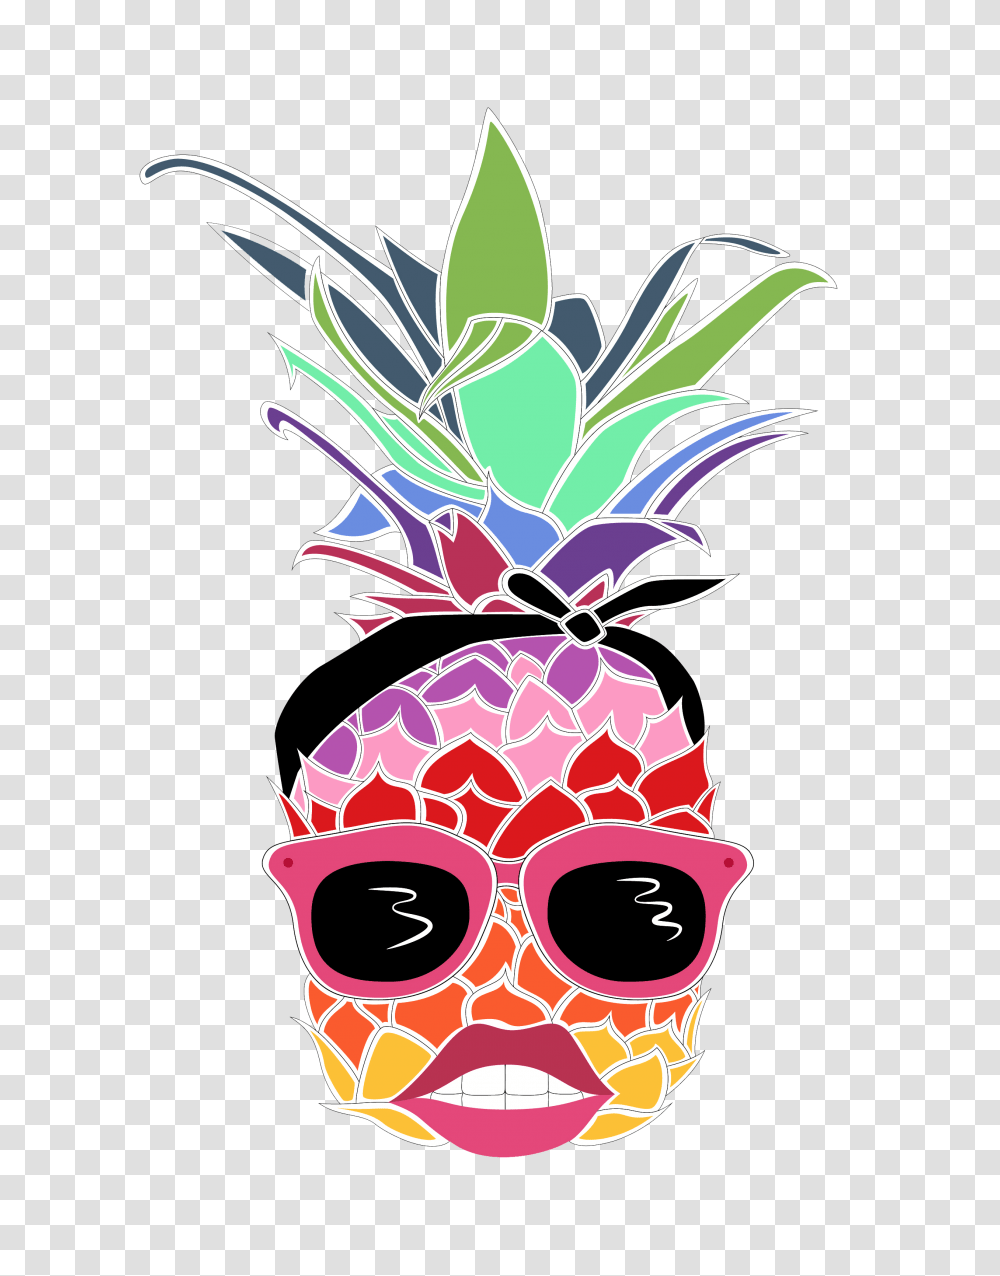 Pineapple Pin Up Steemkr, Head, Floral Design Transparent Png